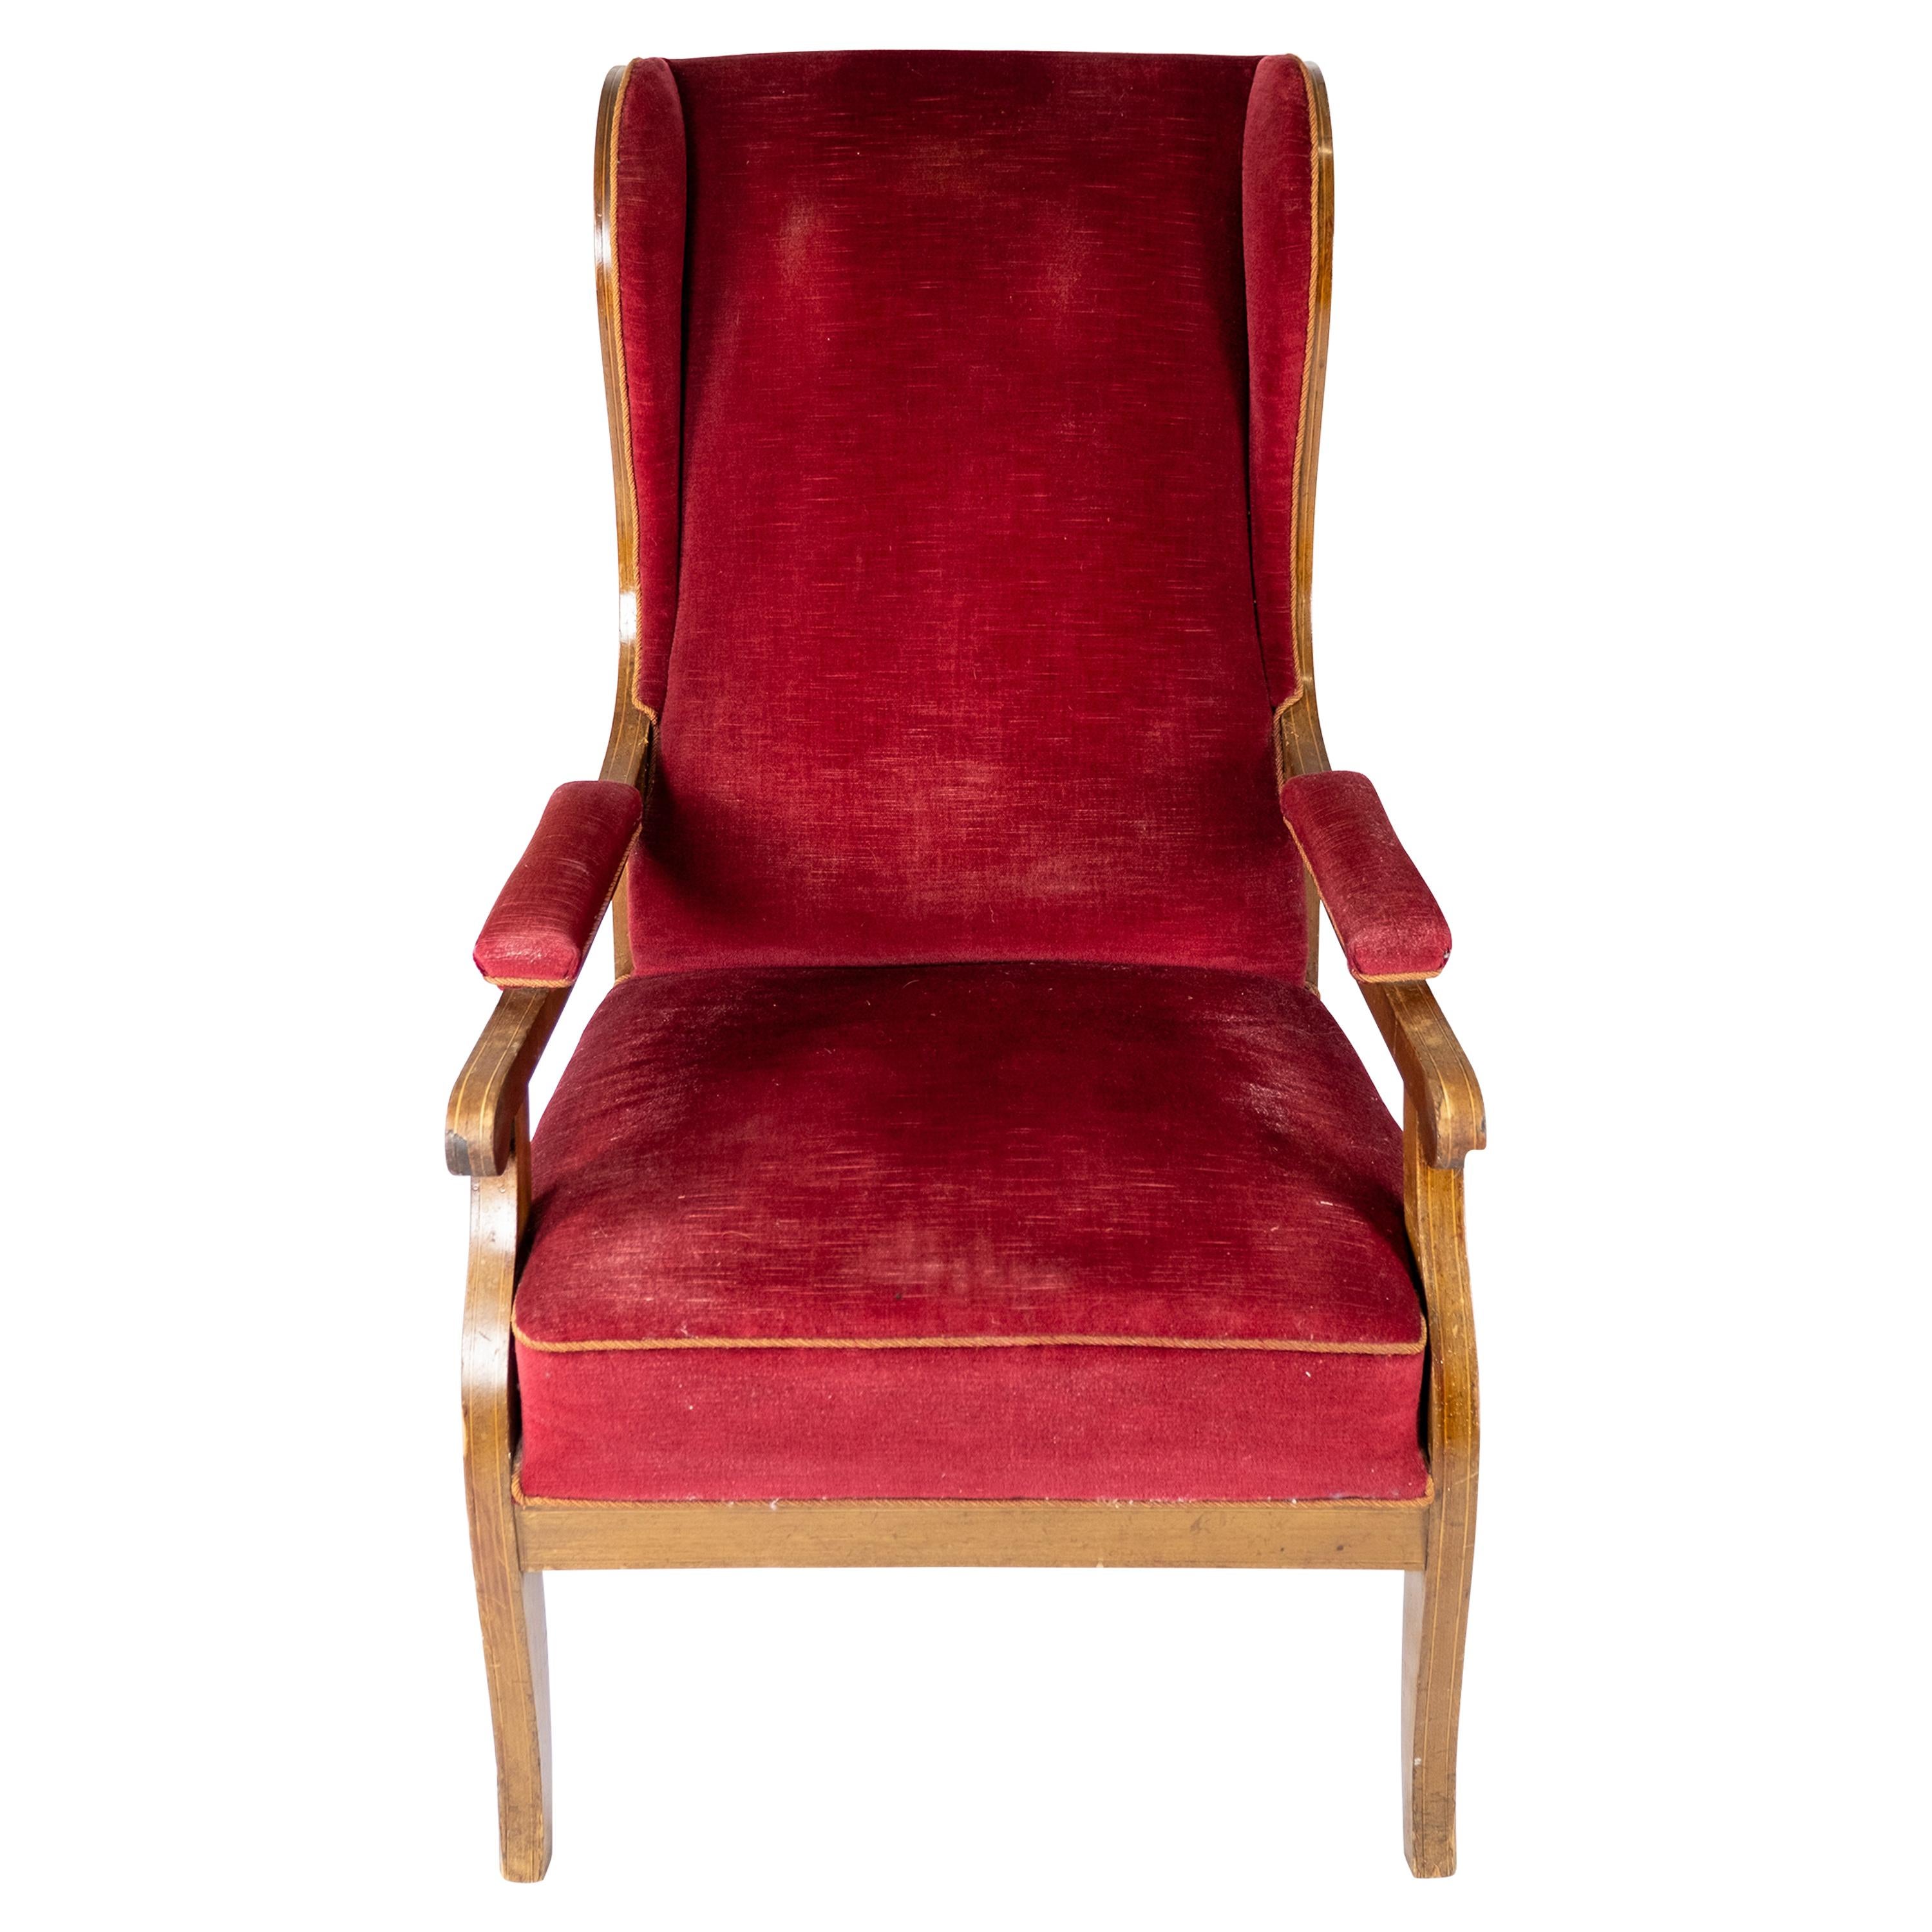 Armchair Made In Red Velvet & Mahogany Designed By Frits Henningsen From 1940s For Sale